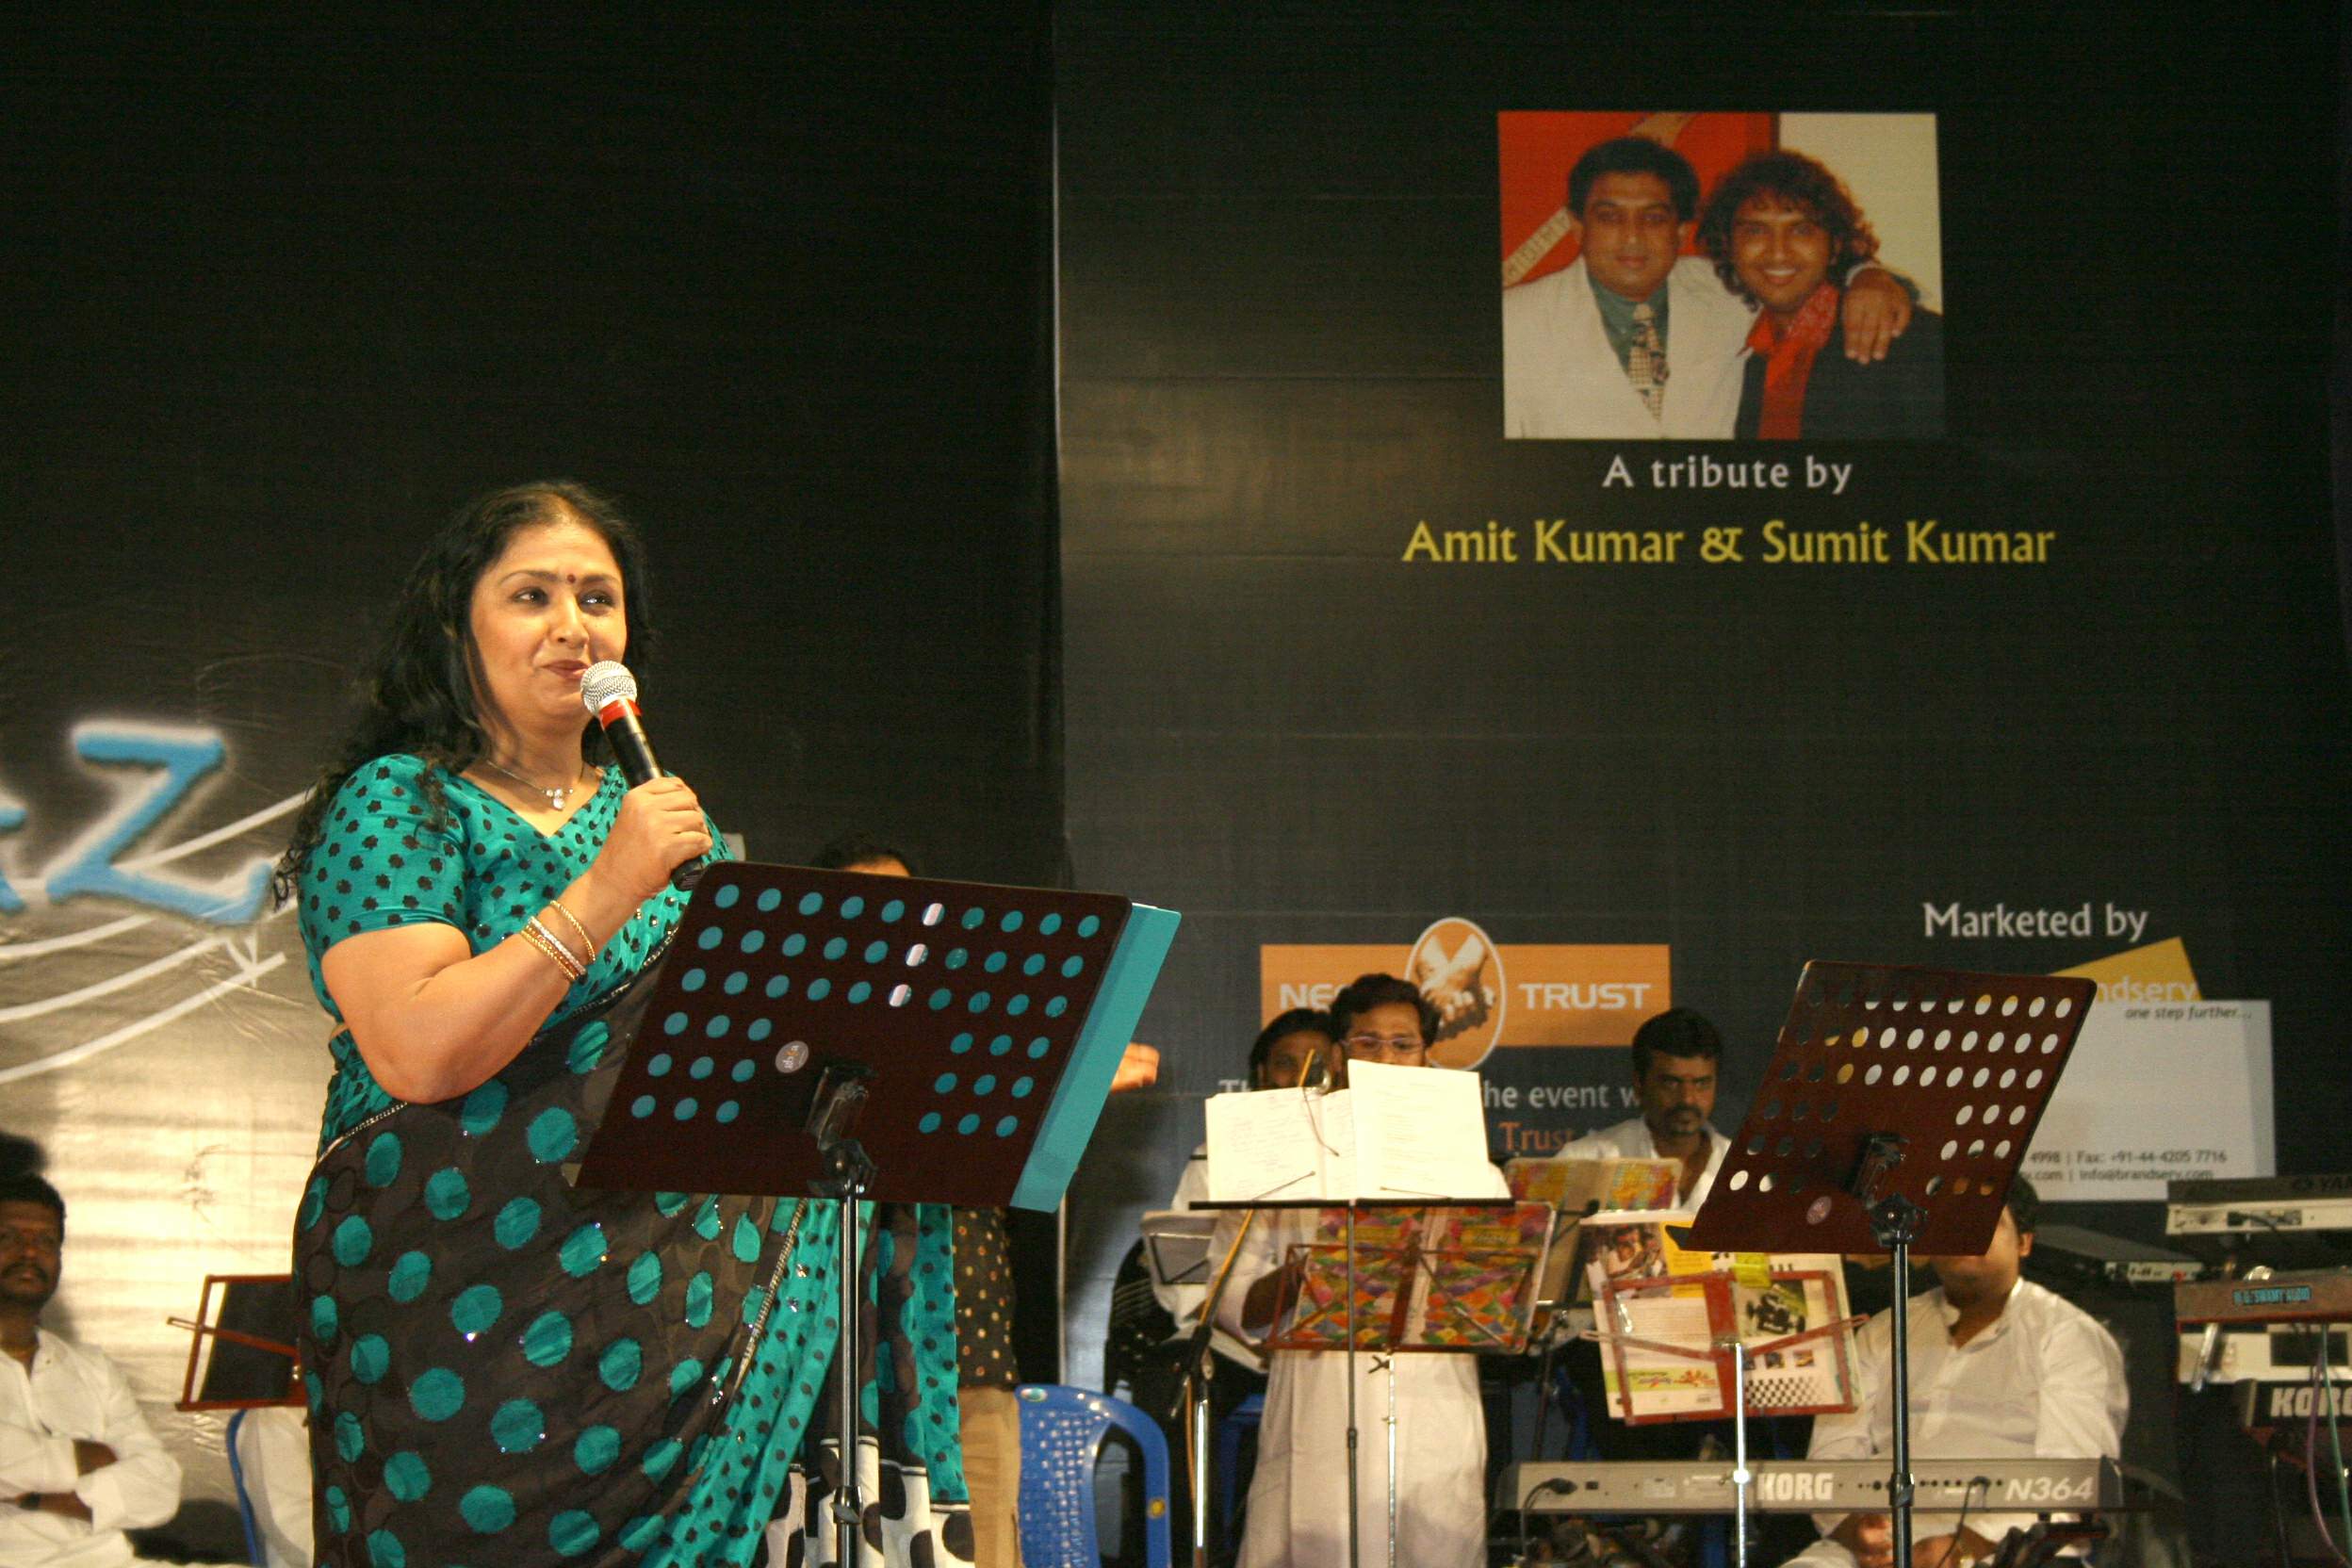 Leena Chandavarkar - FILM STAR and wife of late Kishore Kumar Singing for our Event at Chennai on 28 June 08